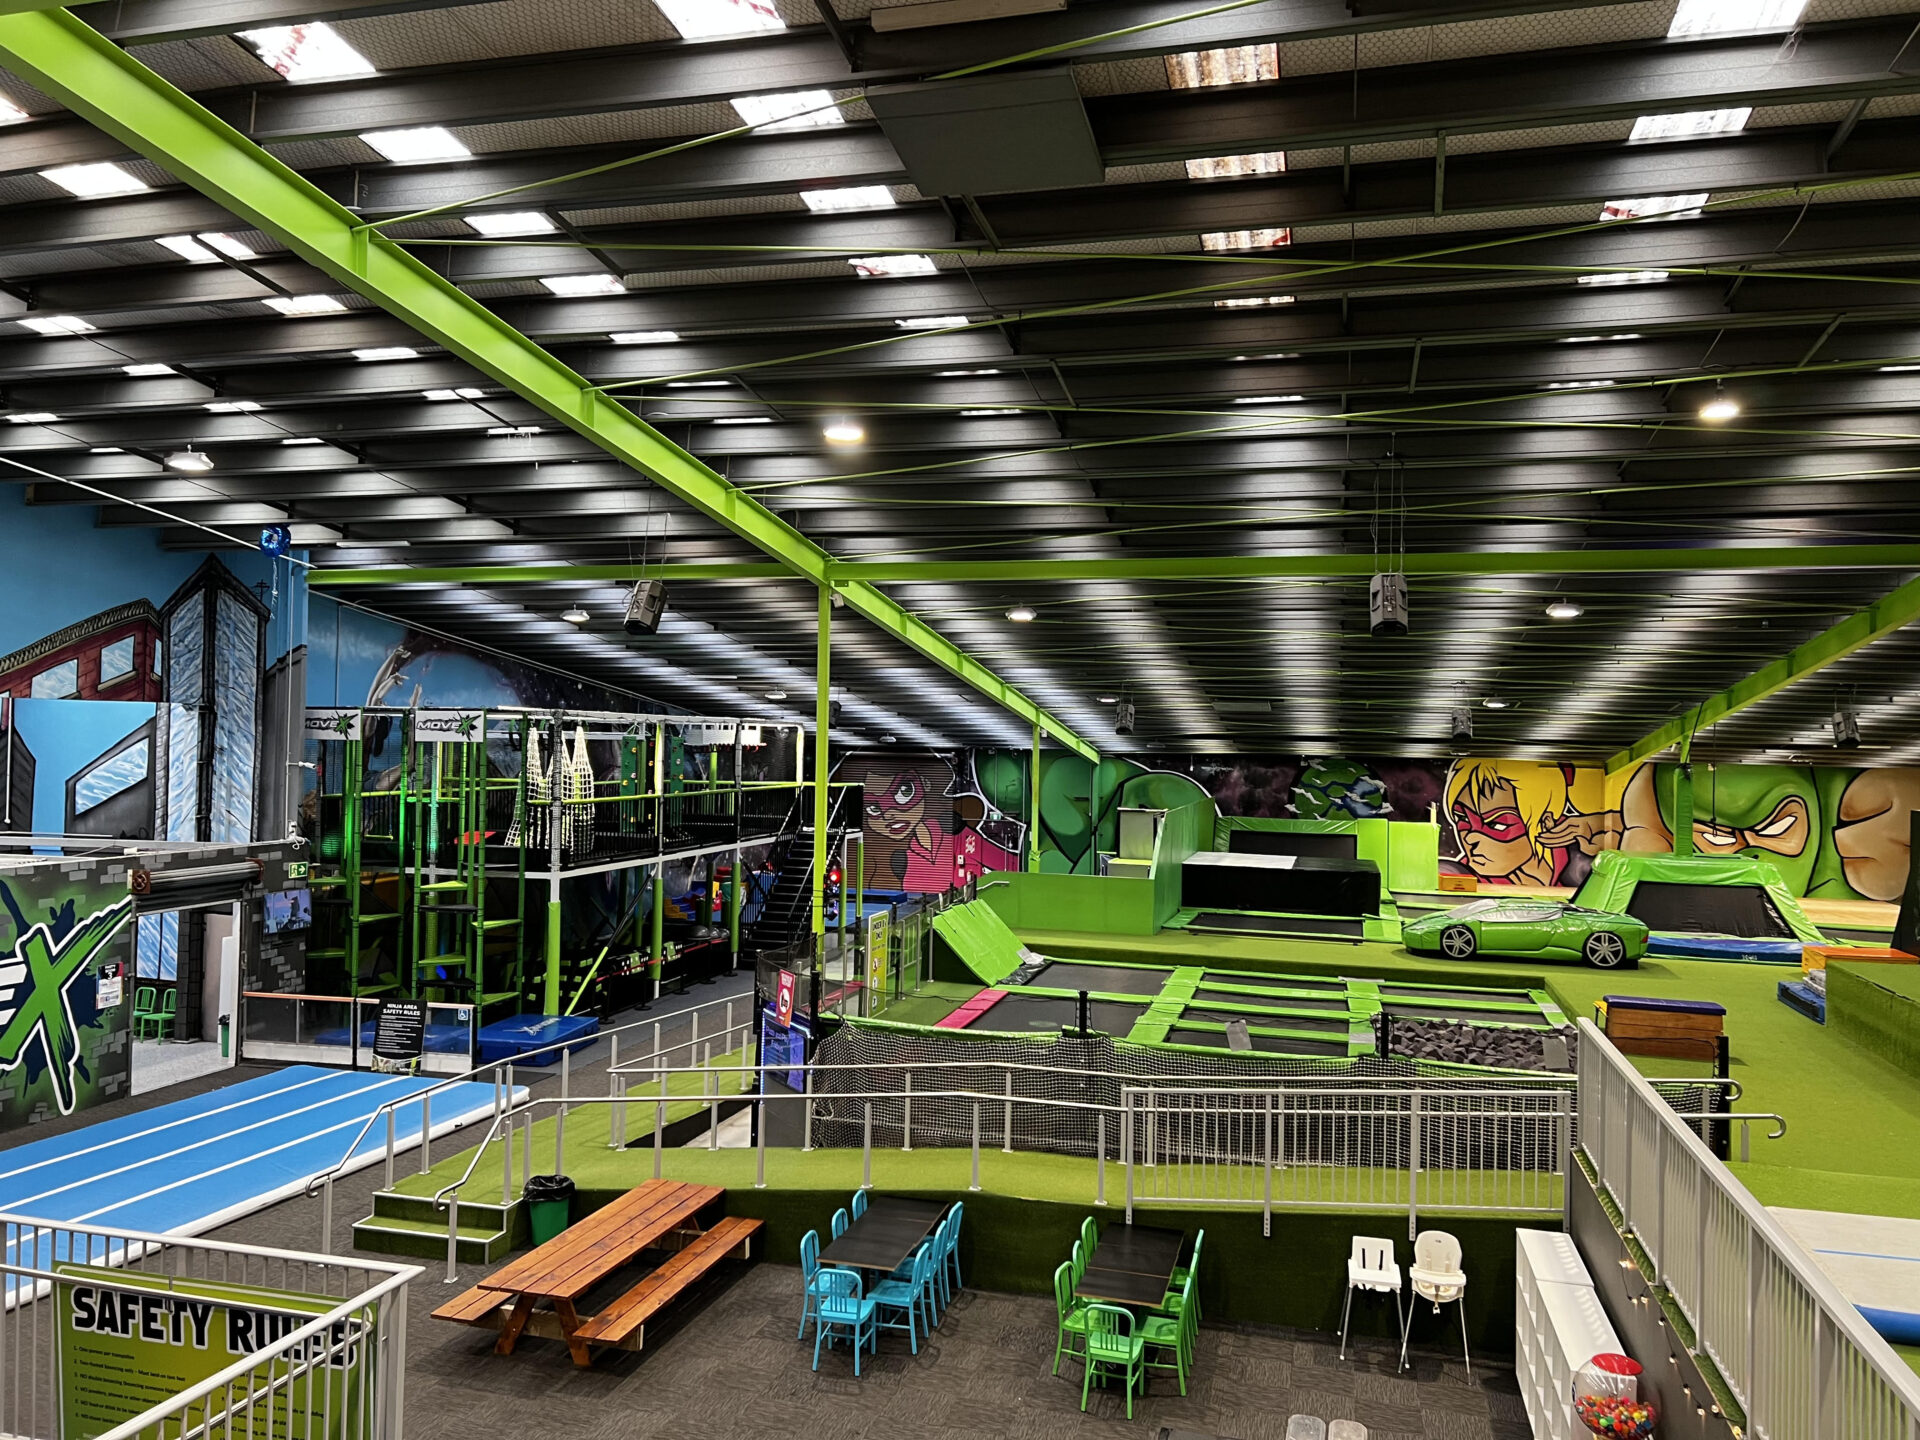 Image of Nerf War on the trampolines event